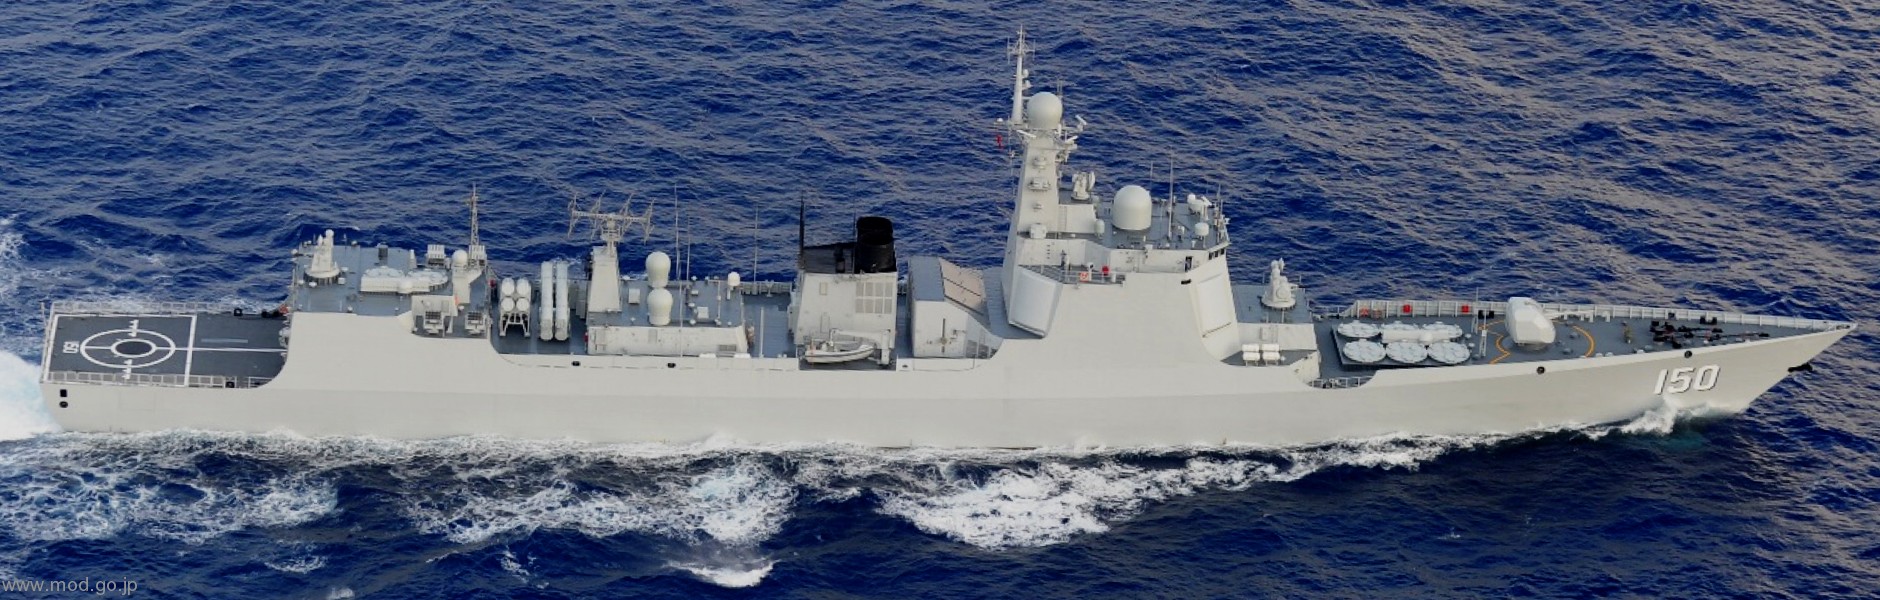 ddg-150 plans changchun type 052c class guided missile destroyer china people's liberation army navy 03